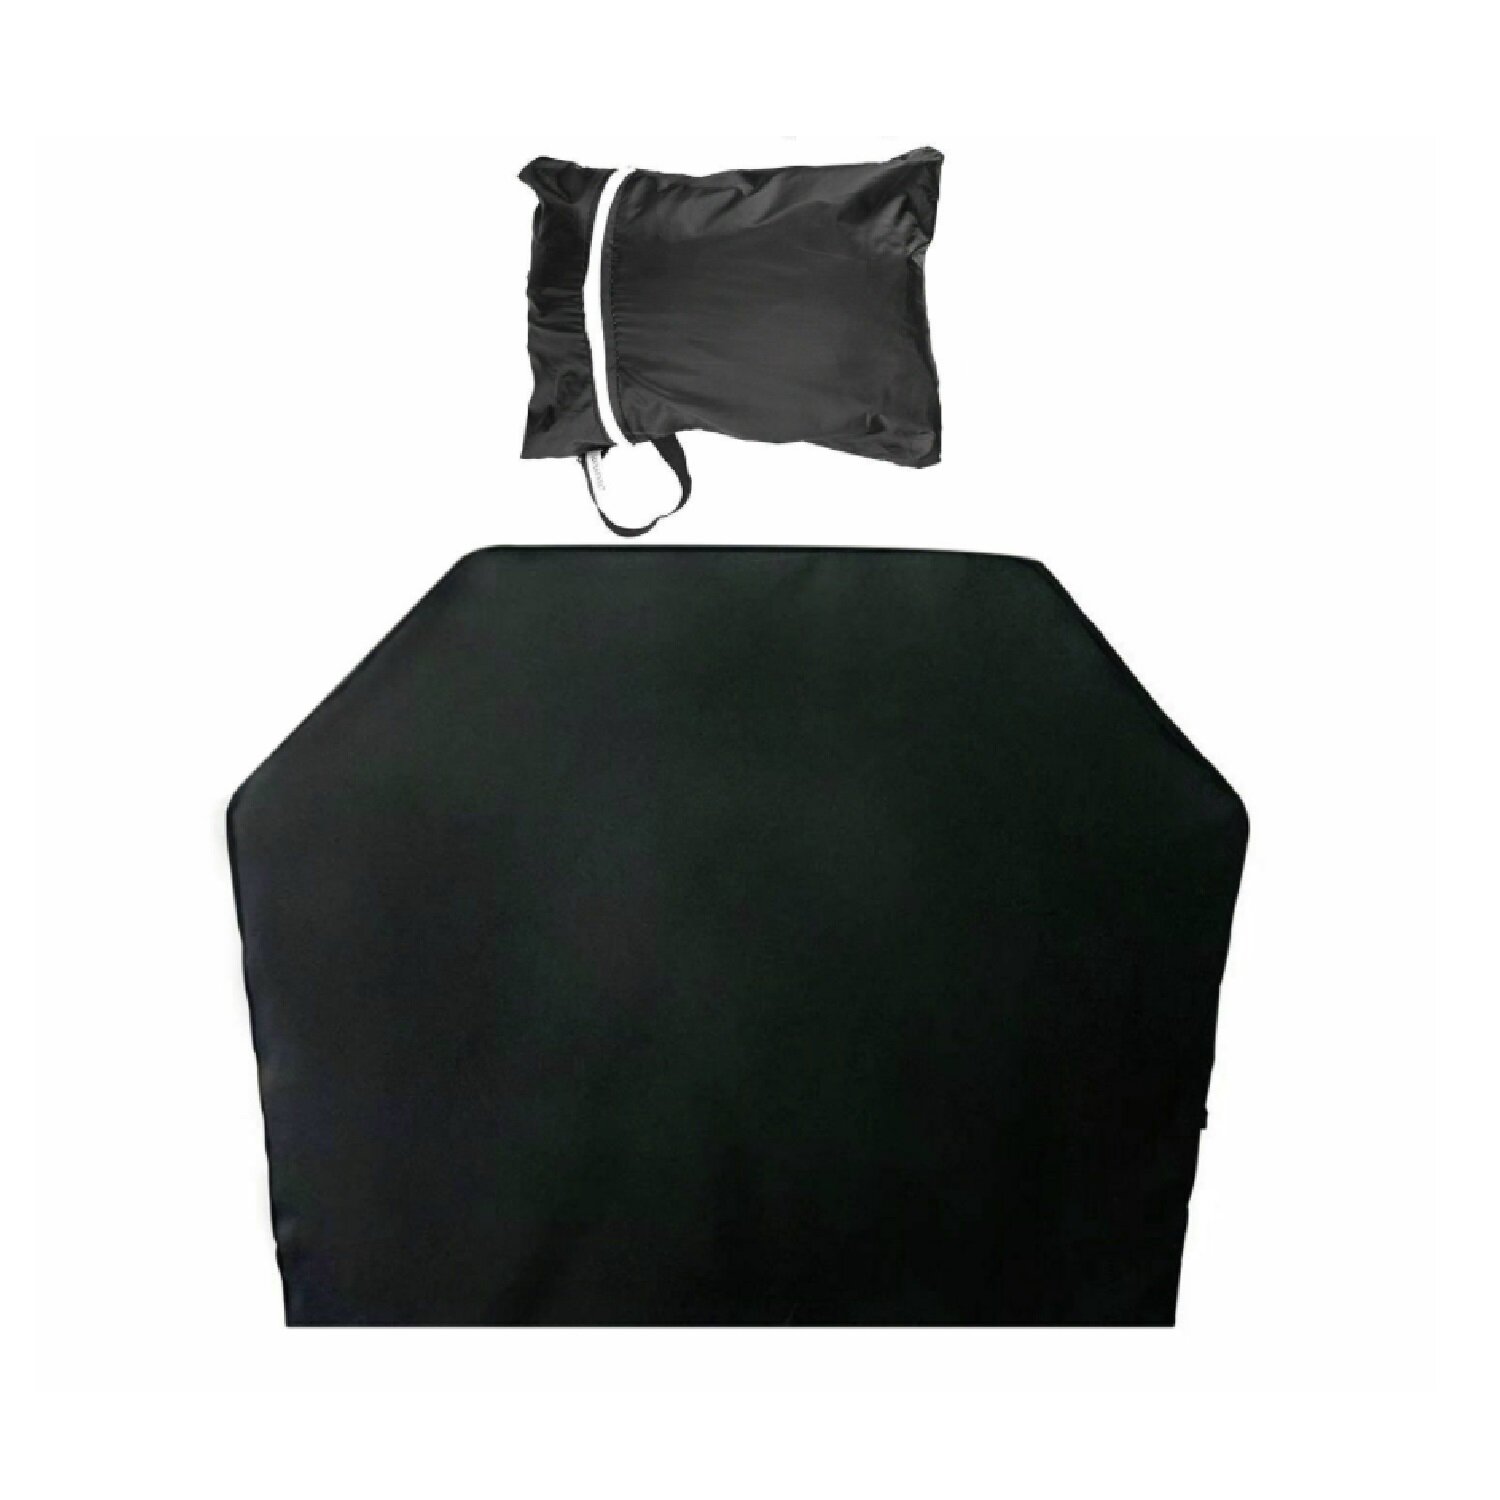 Waterproof Barbeque Grill Cover Outdoor Heavy Duty Protection Round Shape Bag 